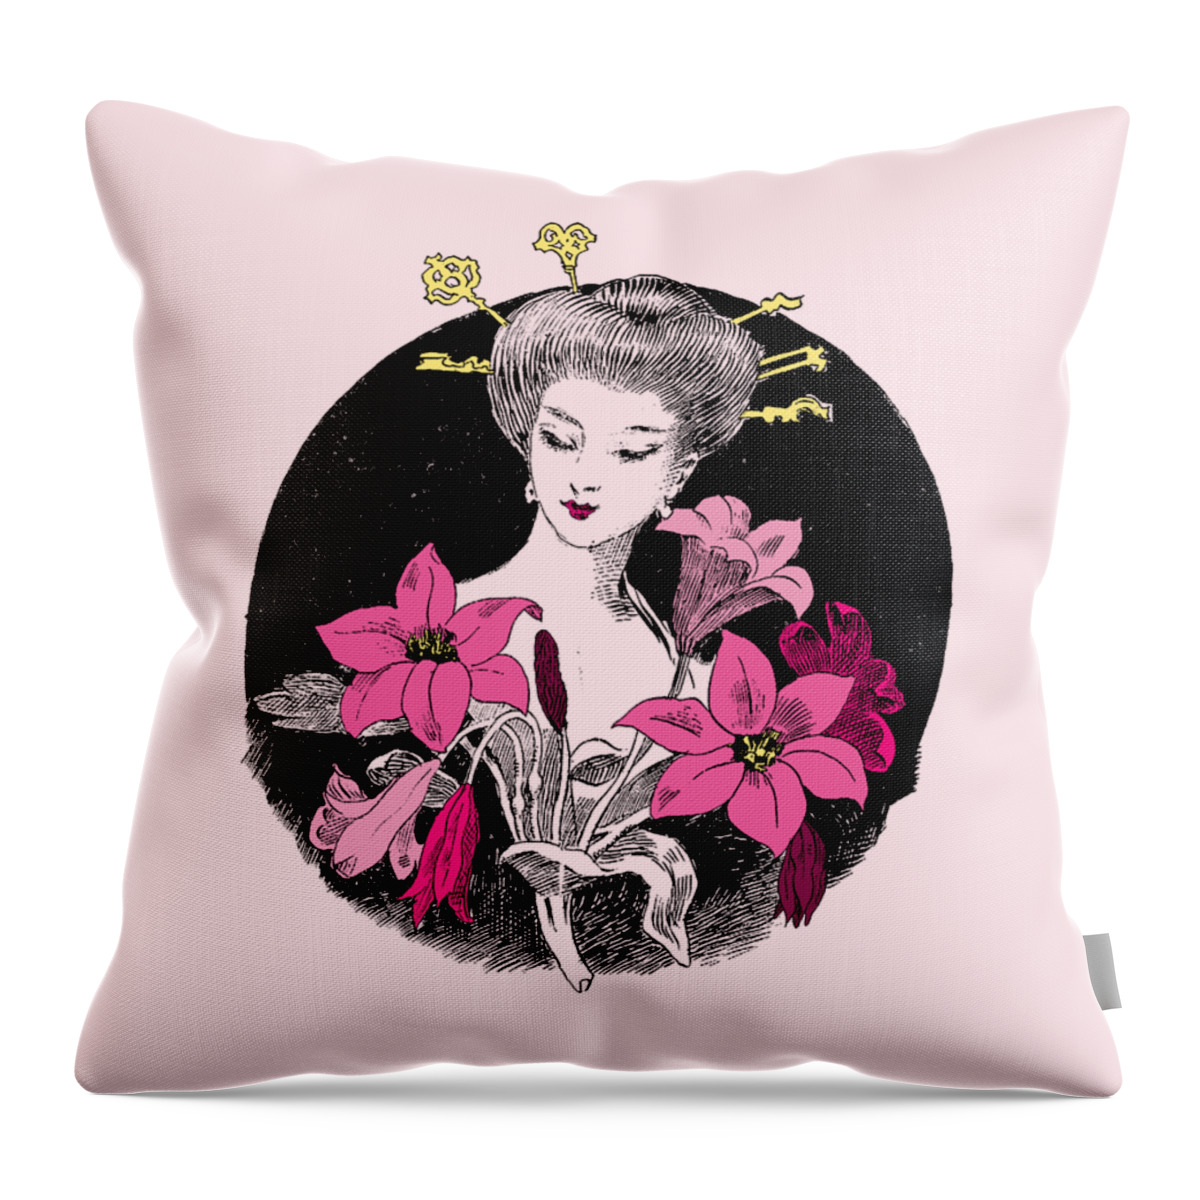 Japan Throw Pillow featuring the digital art Lady Amaryllis by Madame Memento